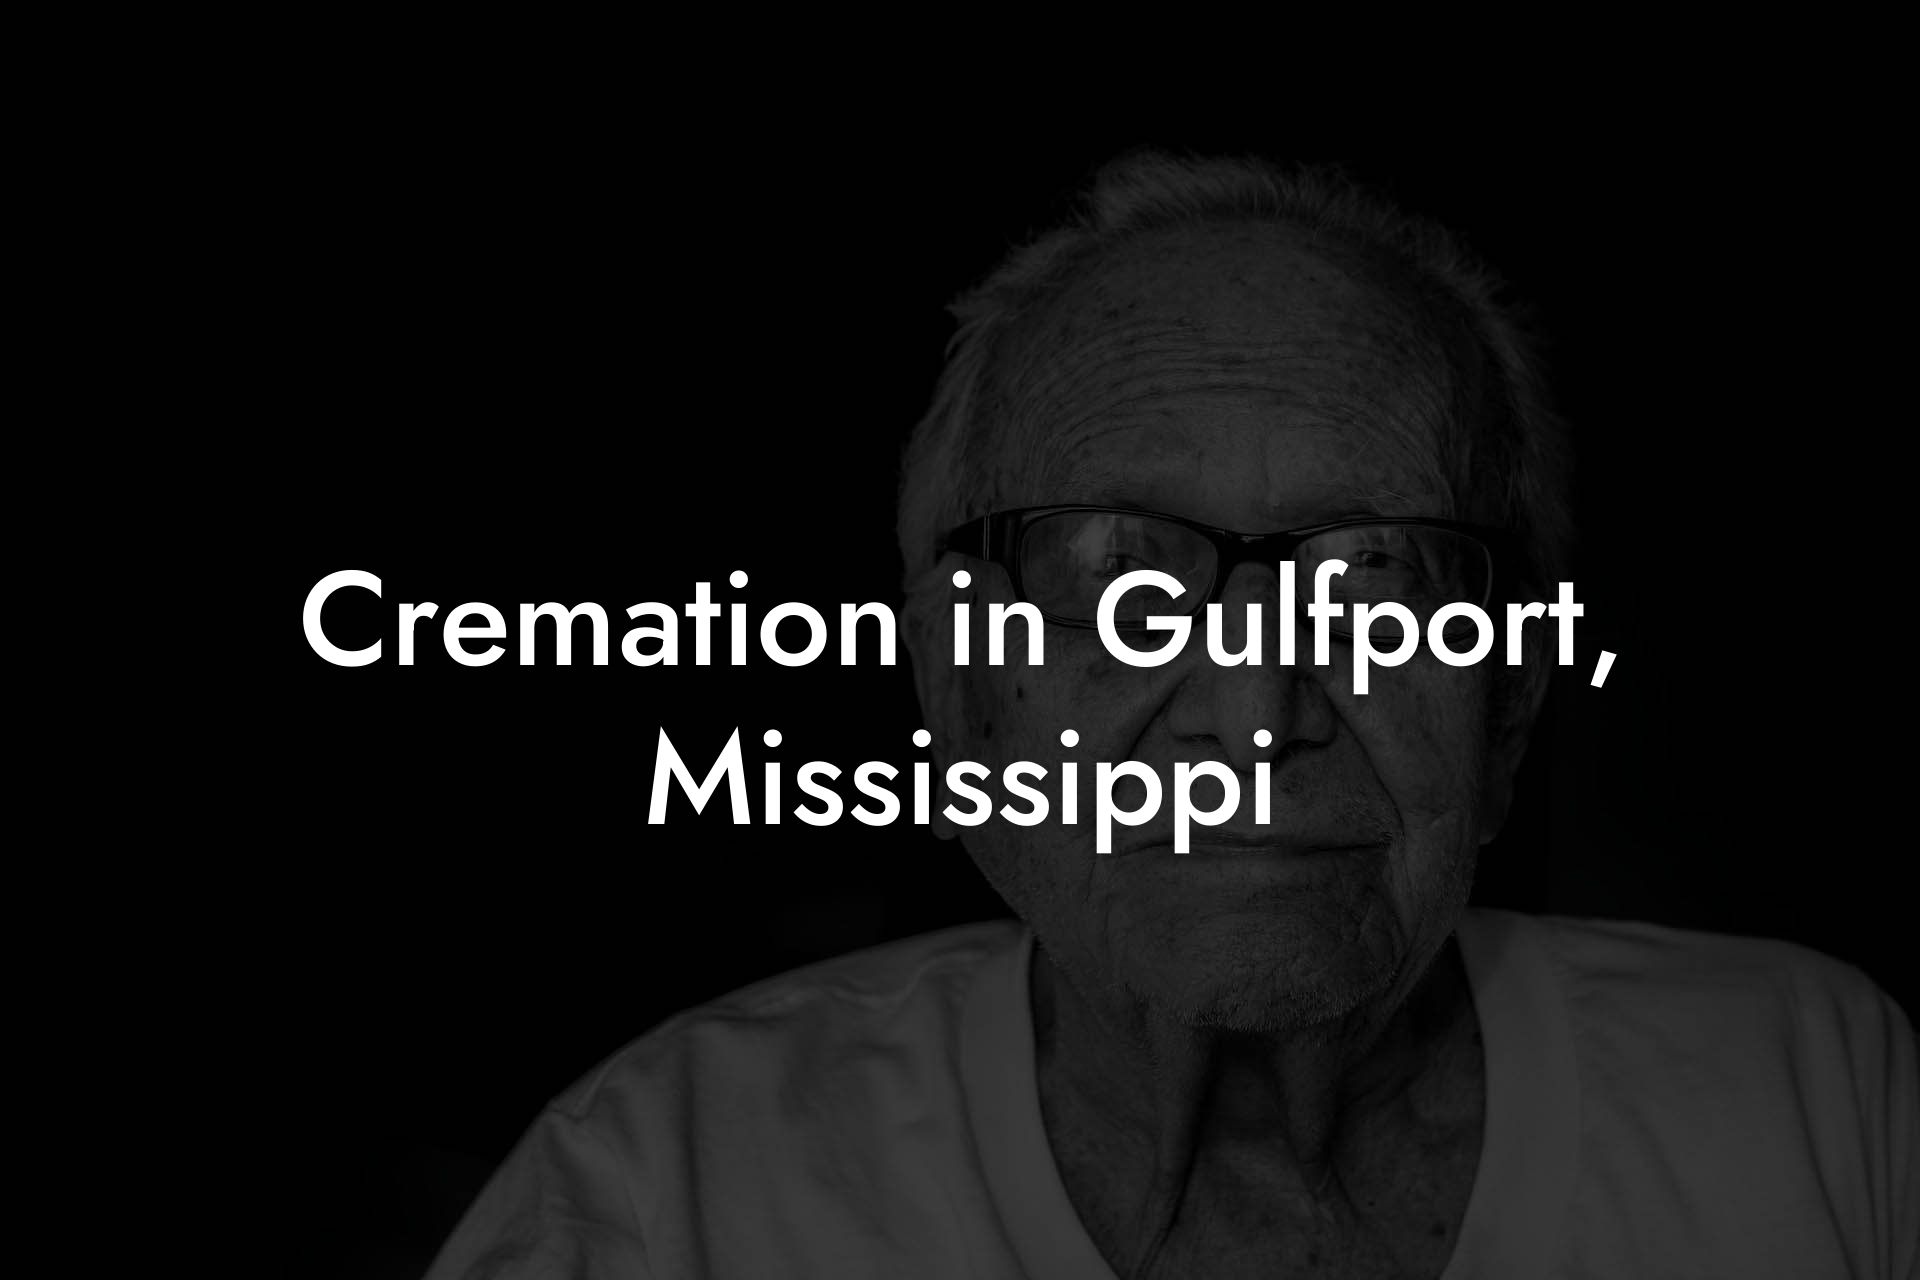 Cremation in Gulfport, Mississippi